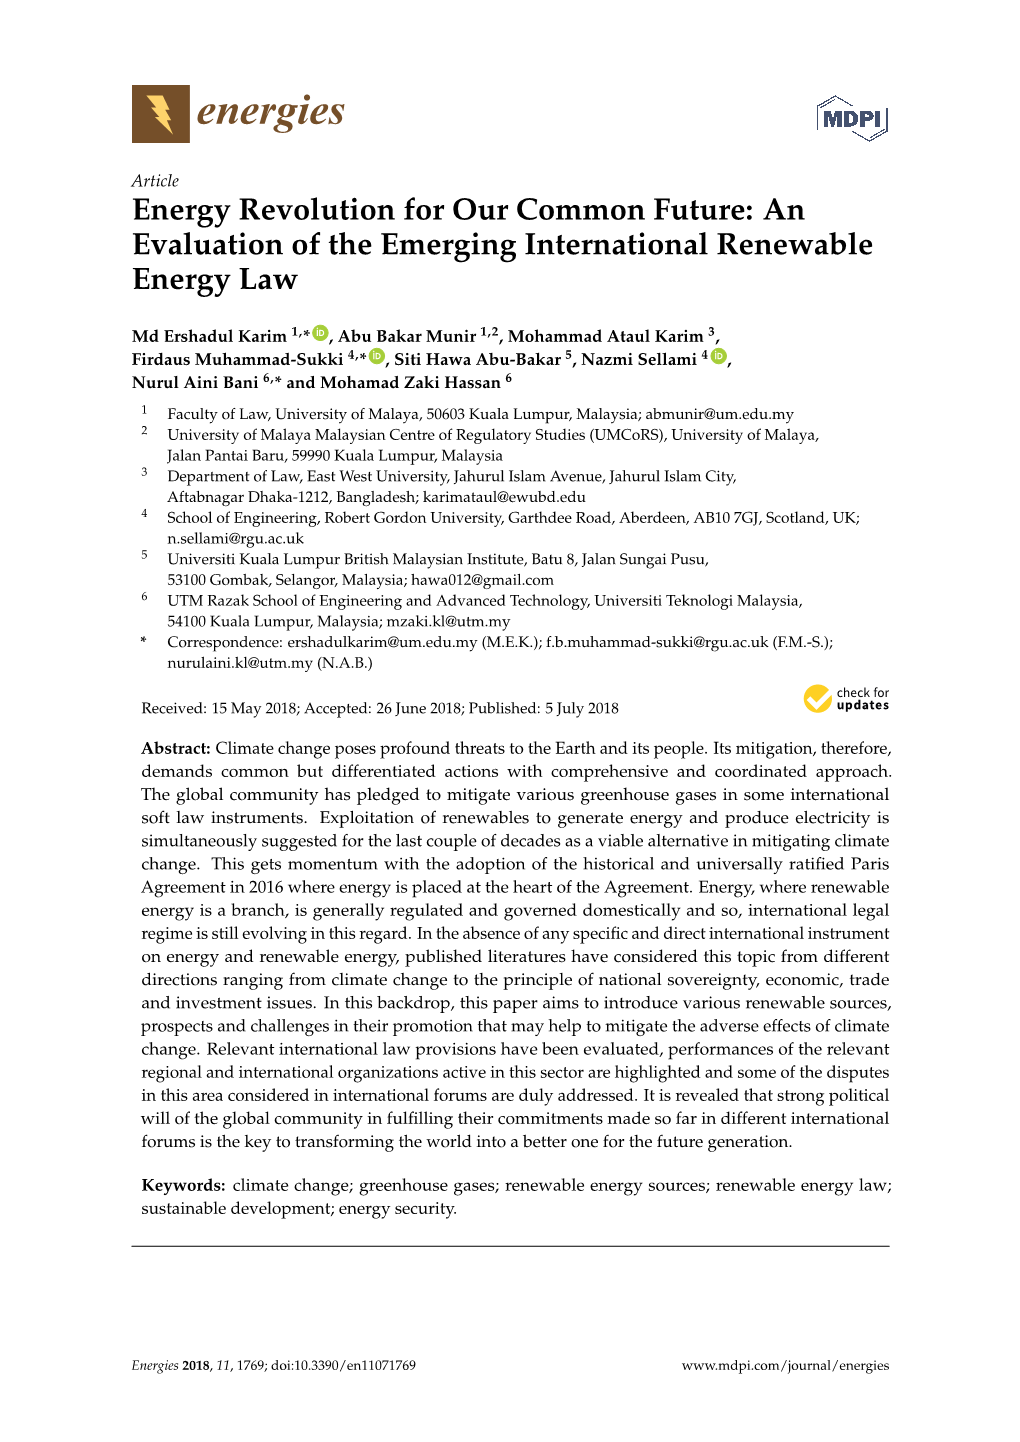 Energy Revolution for Our Common Future: an Evaluation of the Emerging International Renewable Energy Law